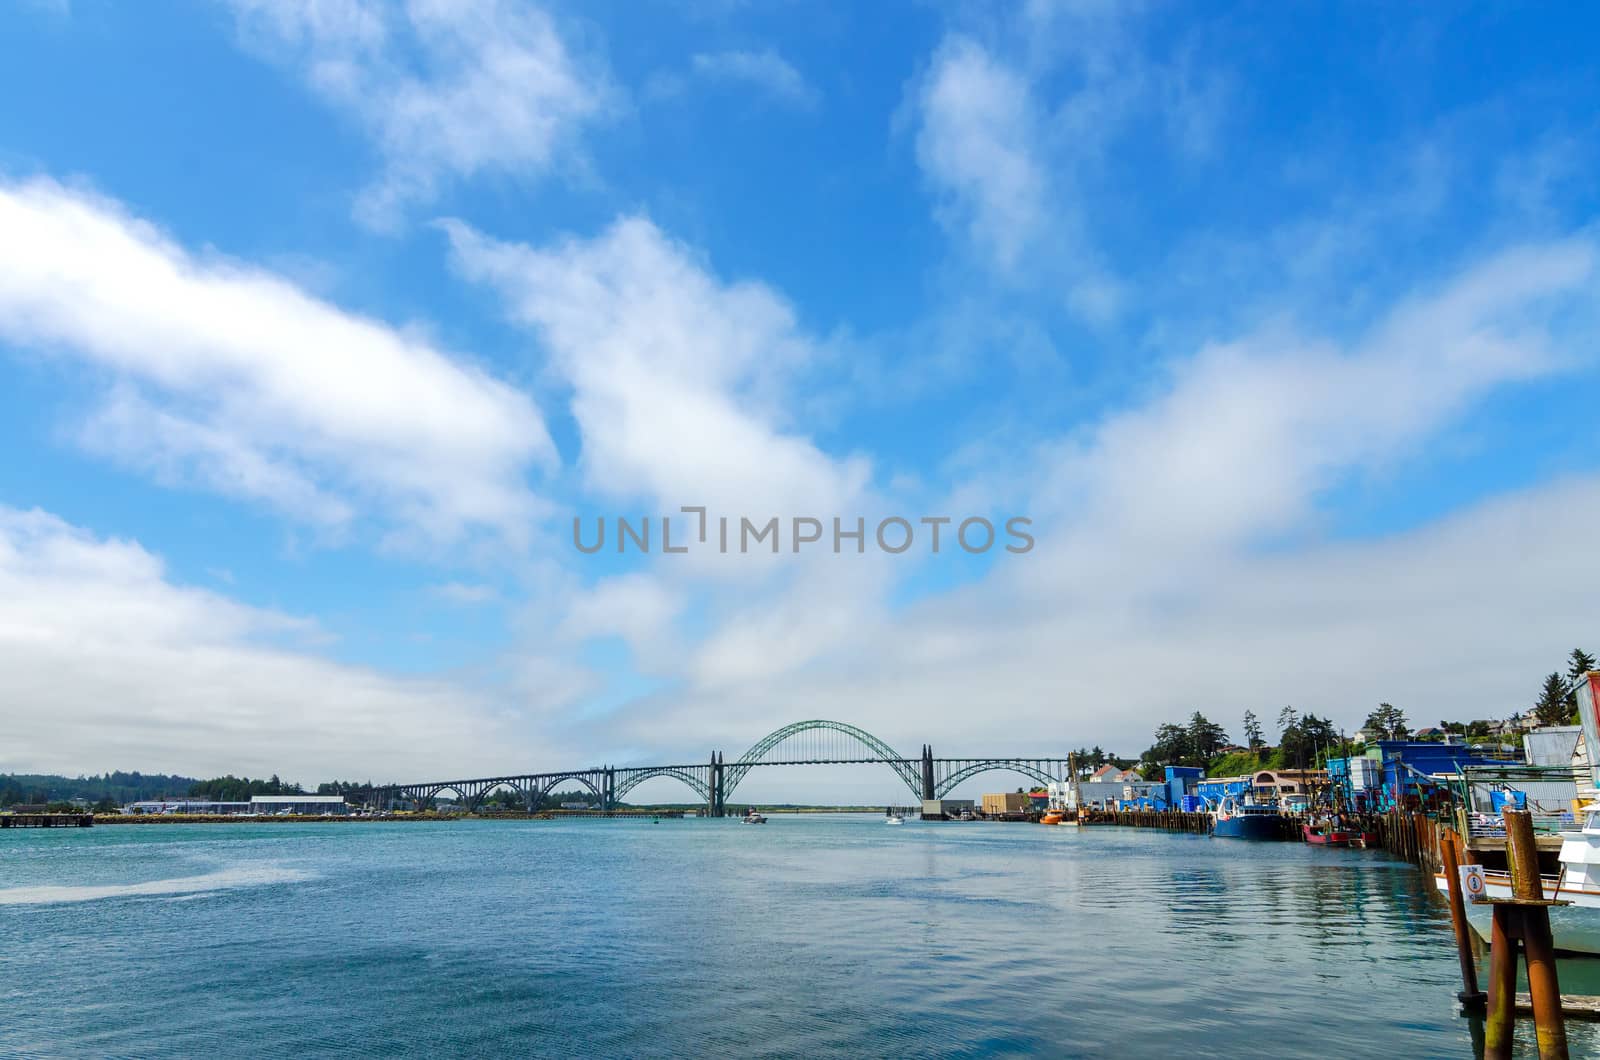 View of Yaquina Bay bridge from the waterfront of Newport, Oregon